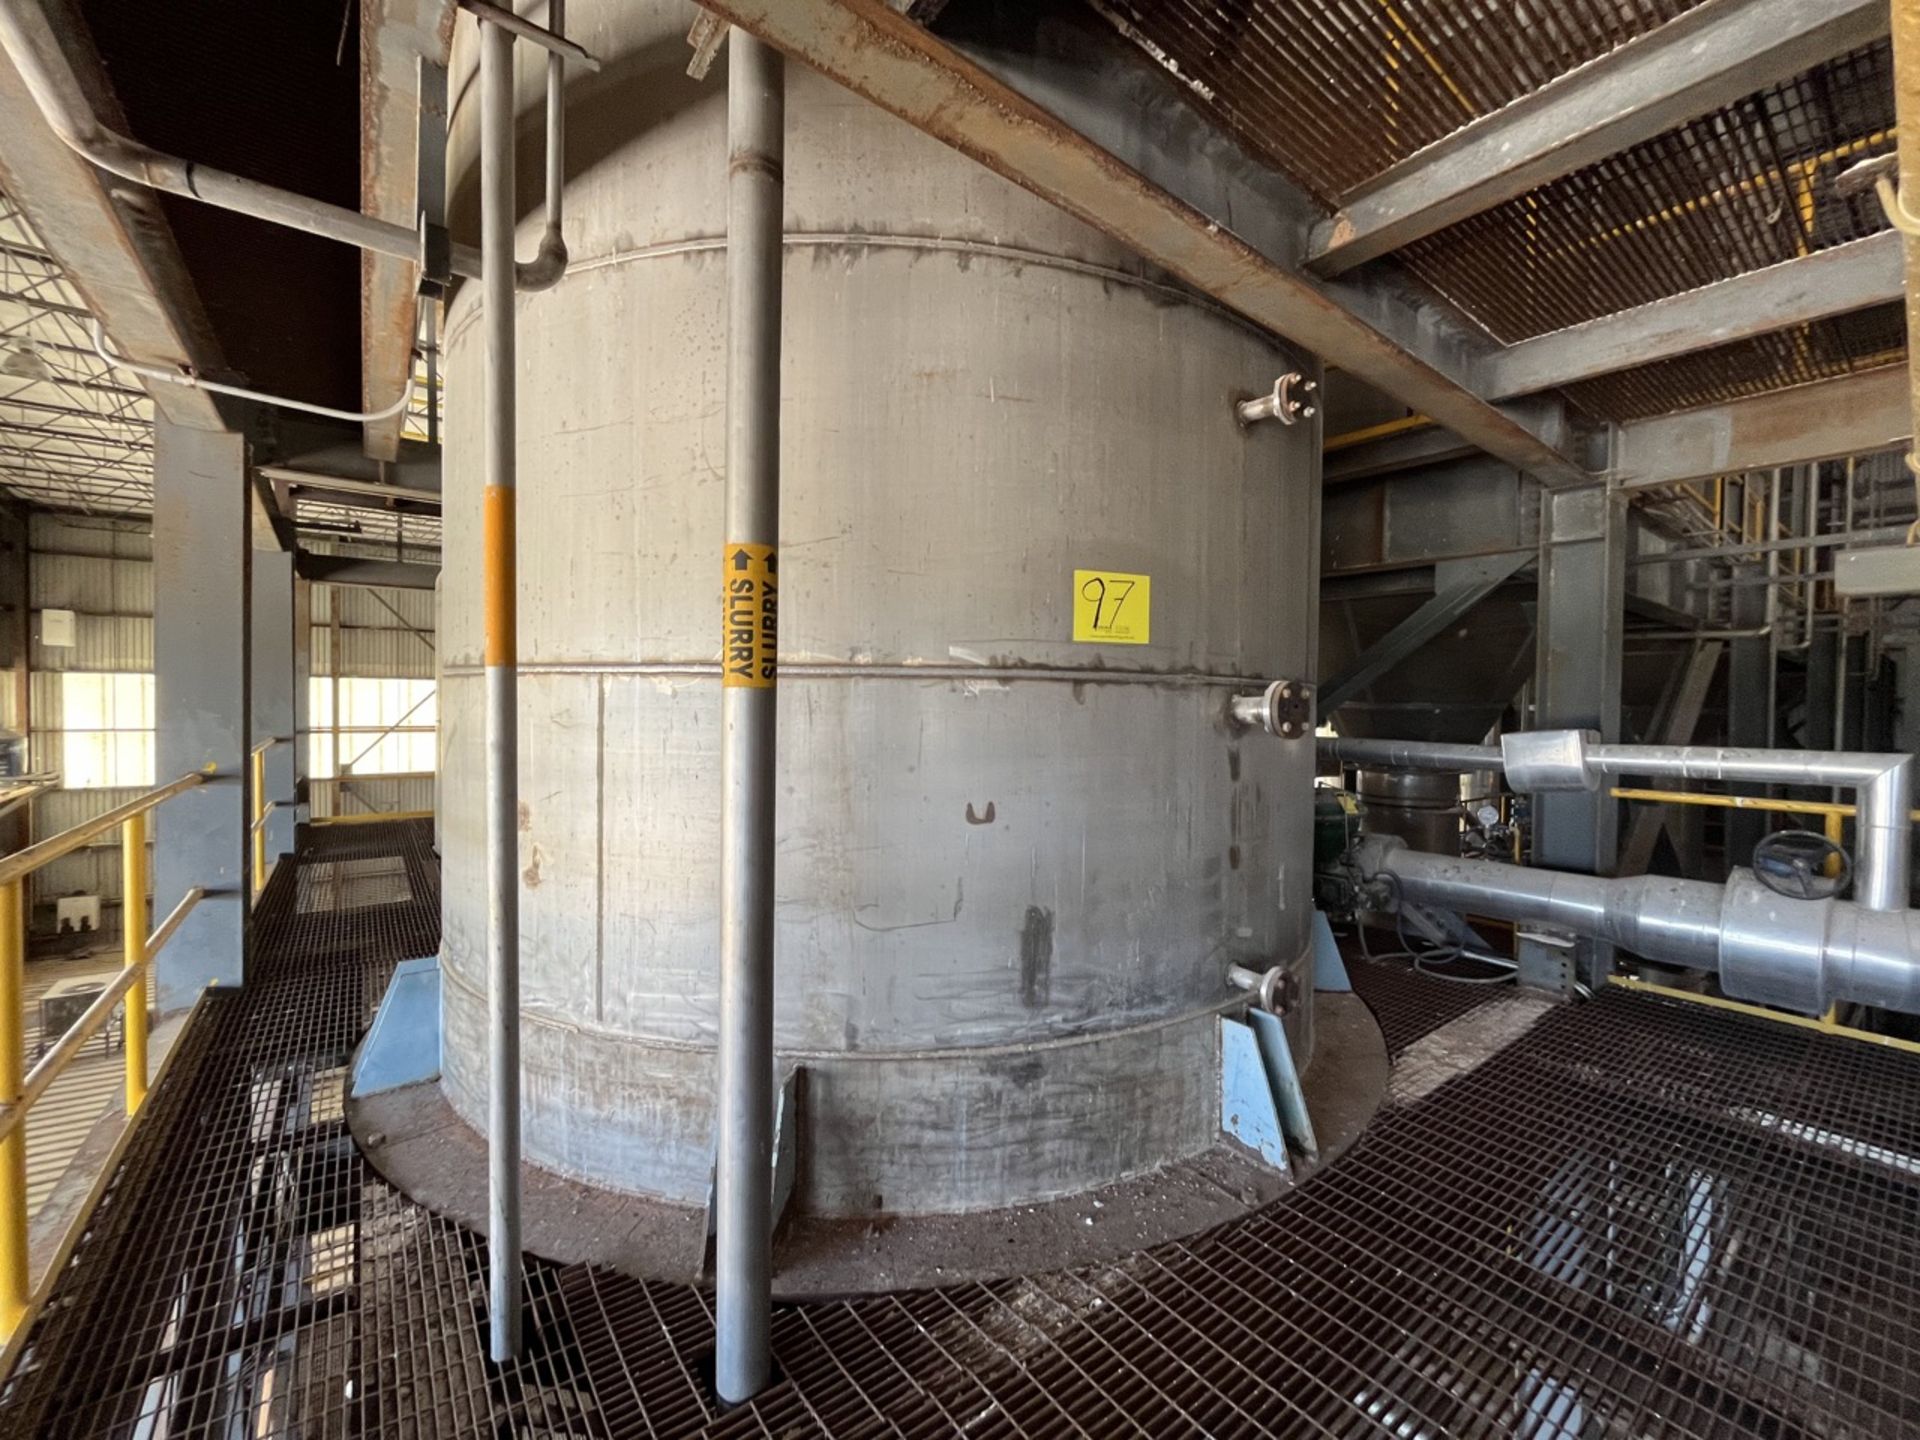 Conical storage tank with stainless steel toriesferica lid measures approximately 4.30 meters in di - Image 4 of 37